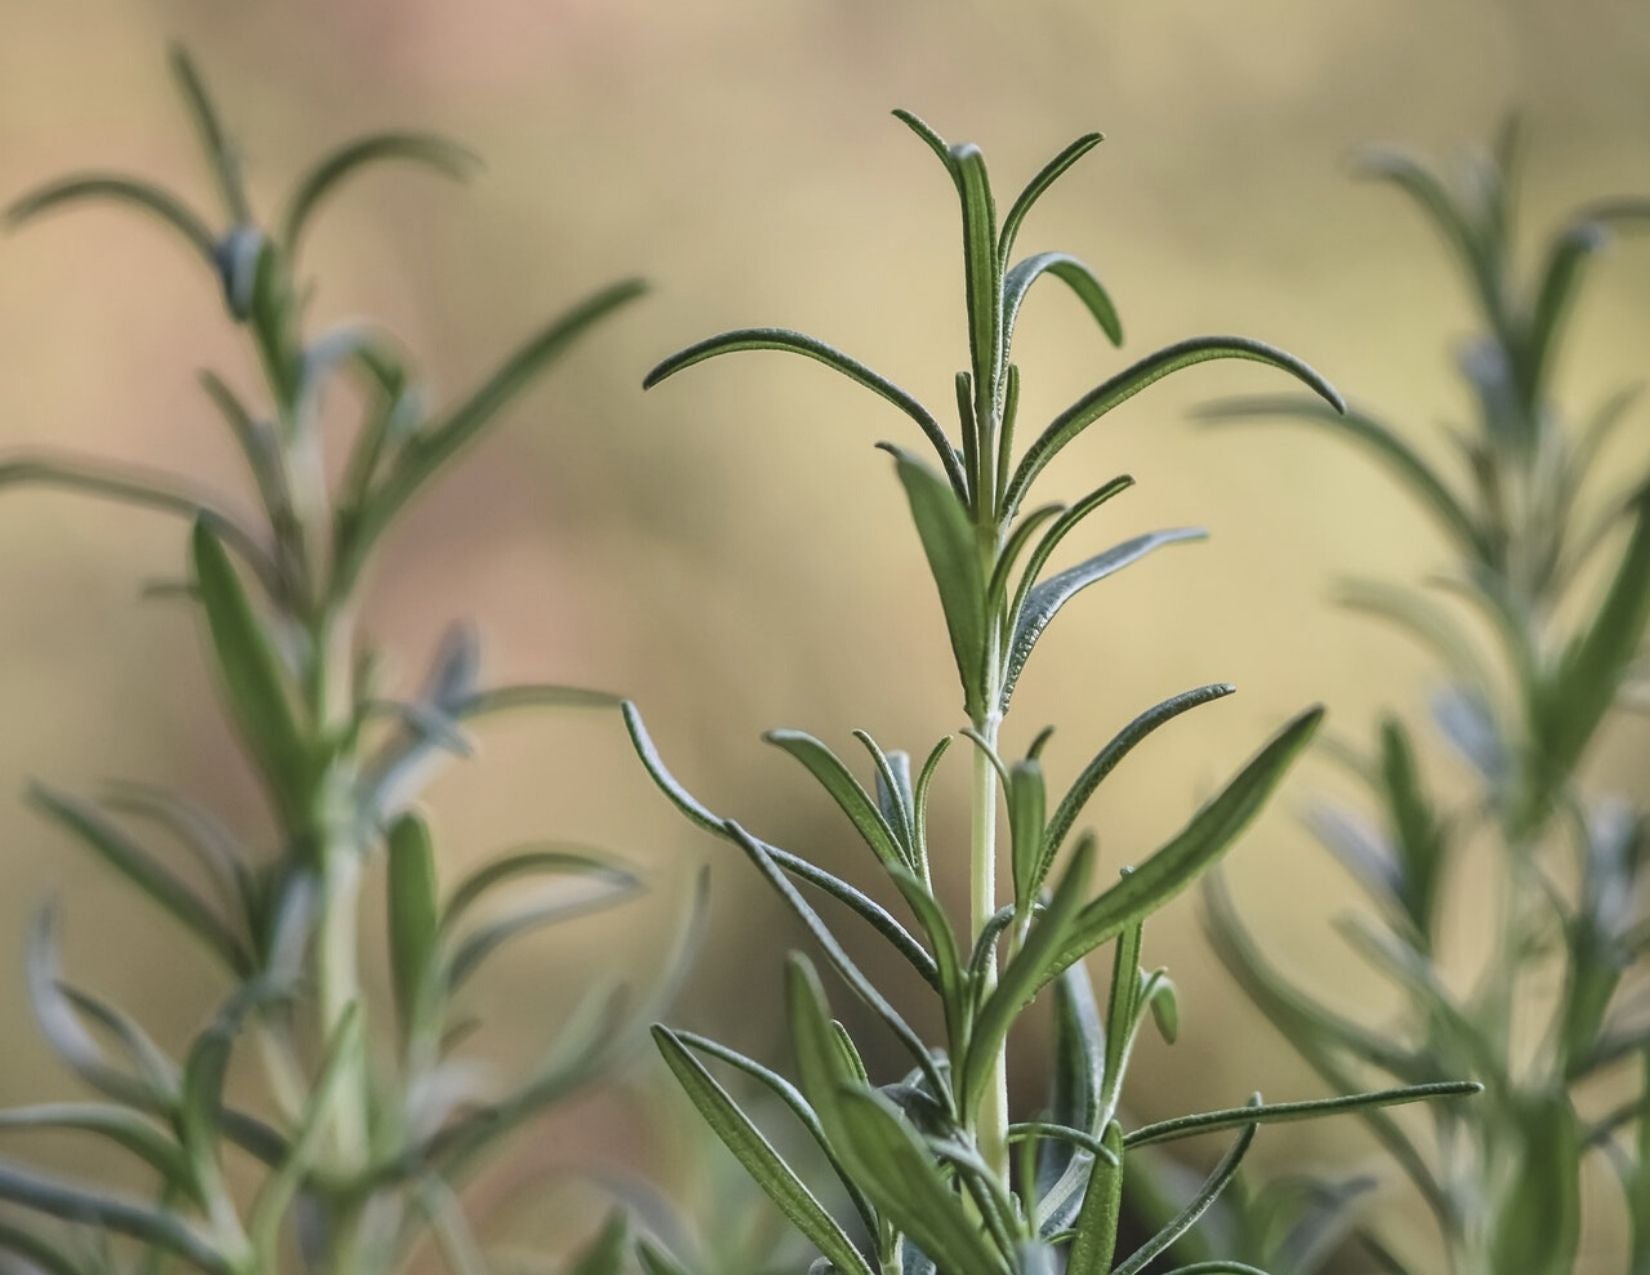 What is Rosemary Extract used for? Due to its antioxidant and antibacterial properties, rosemary essential oil has been used for a long time as a food preservative, but research has shown that it also has other health advantages. In skincare it is used as an antioxidant for products that contain oils, to help increasing the shelf-life.  Rosemary extract has been reported to have following properties:  - antioxidant,  - anti-inflammatory,